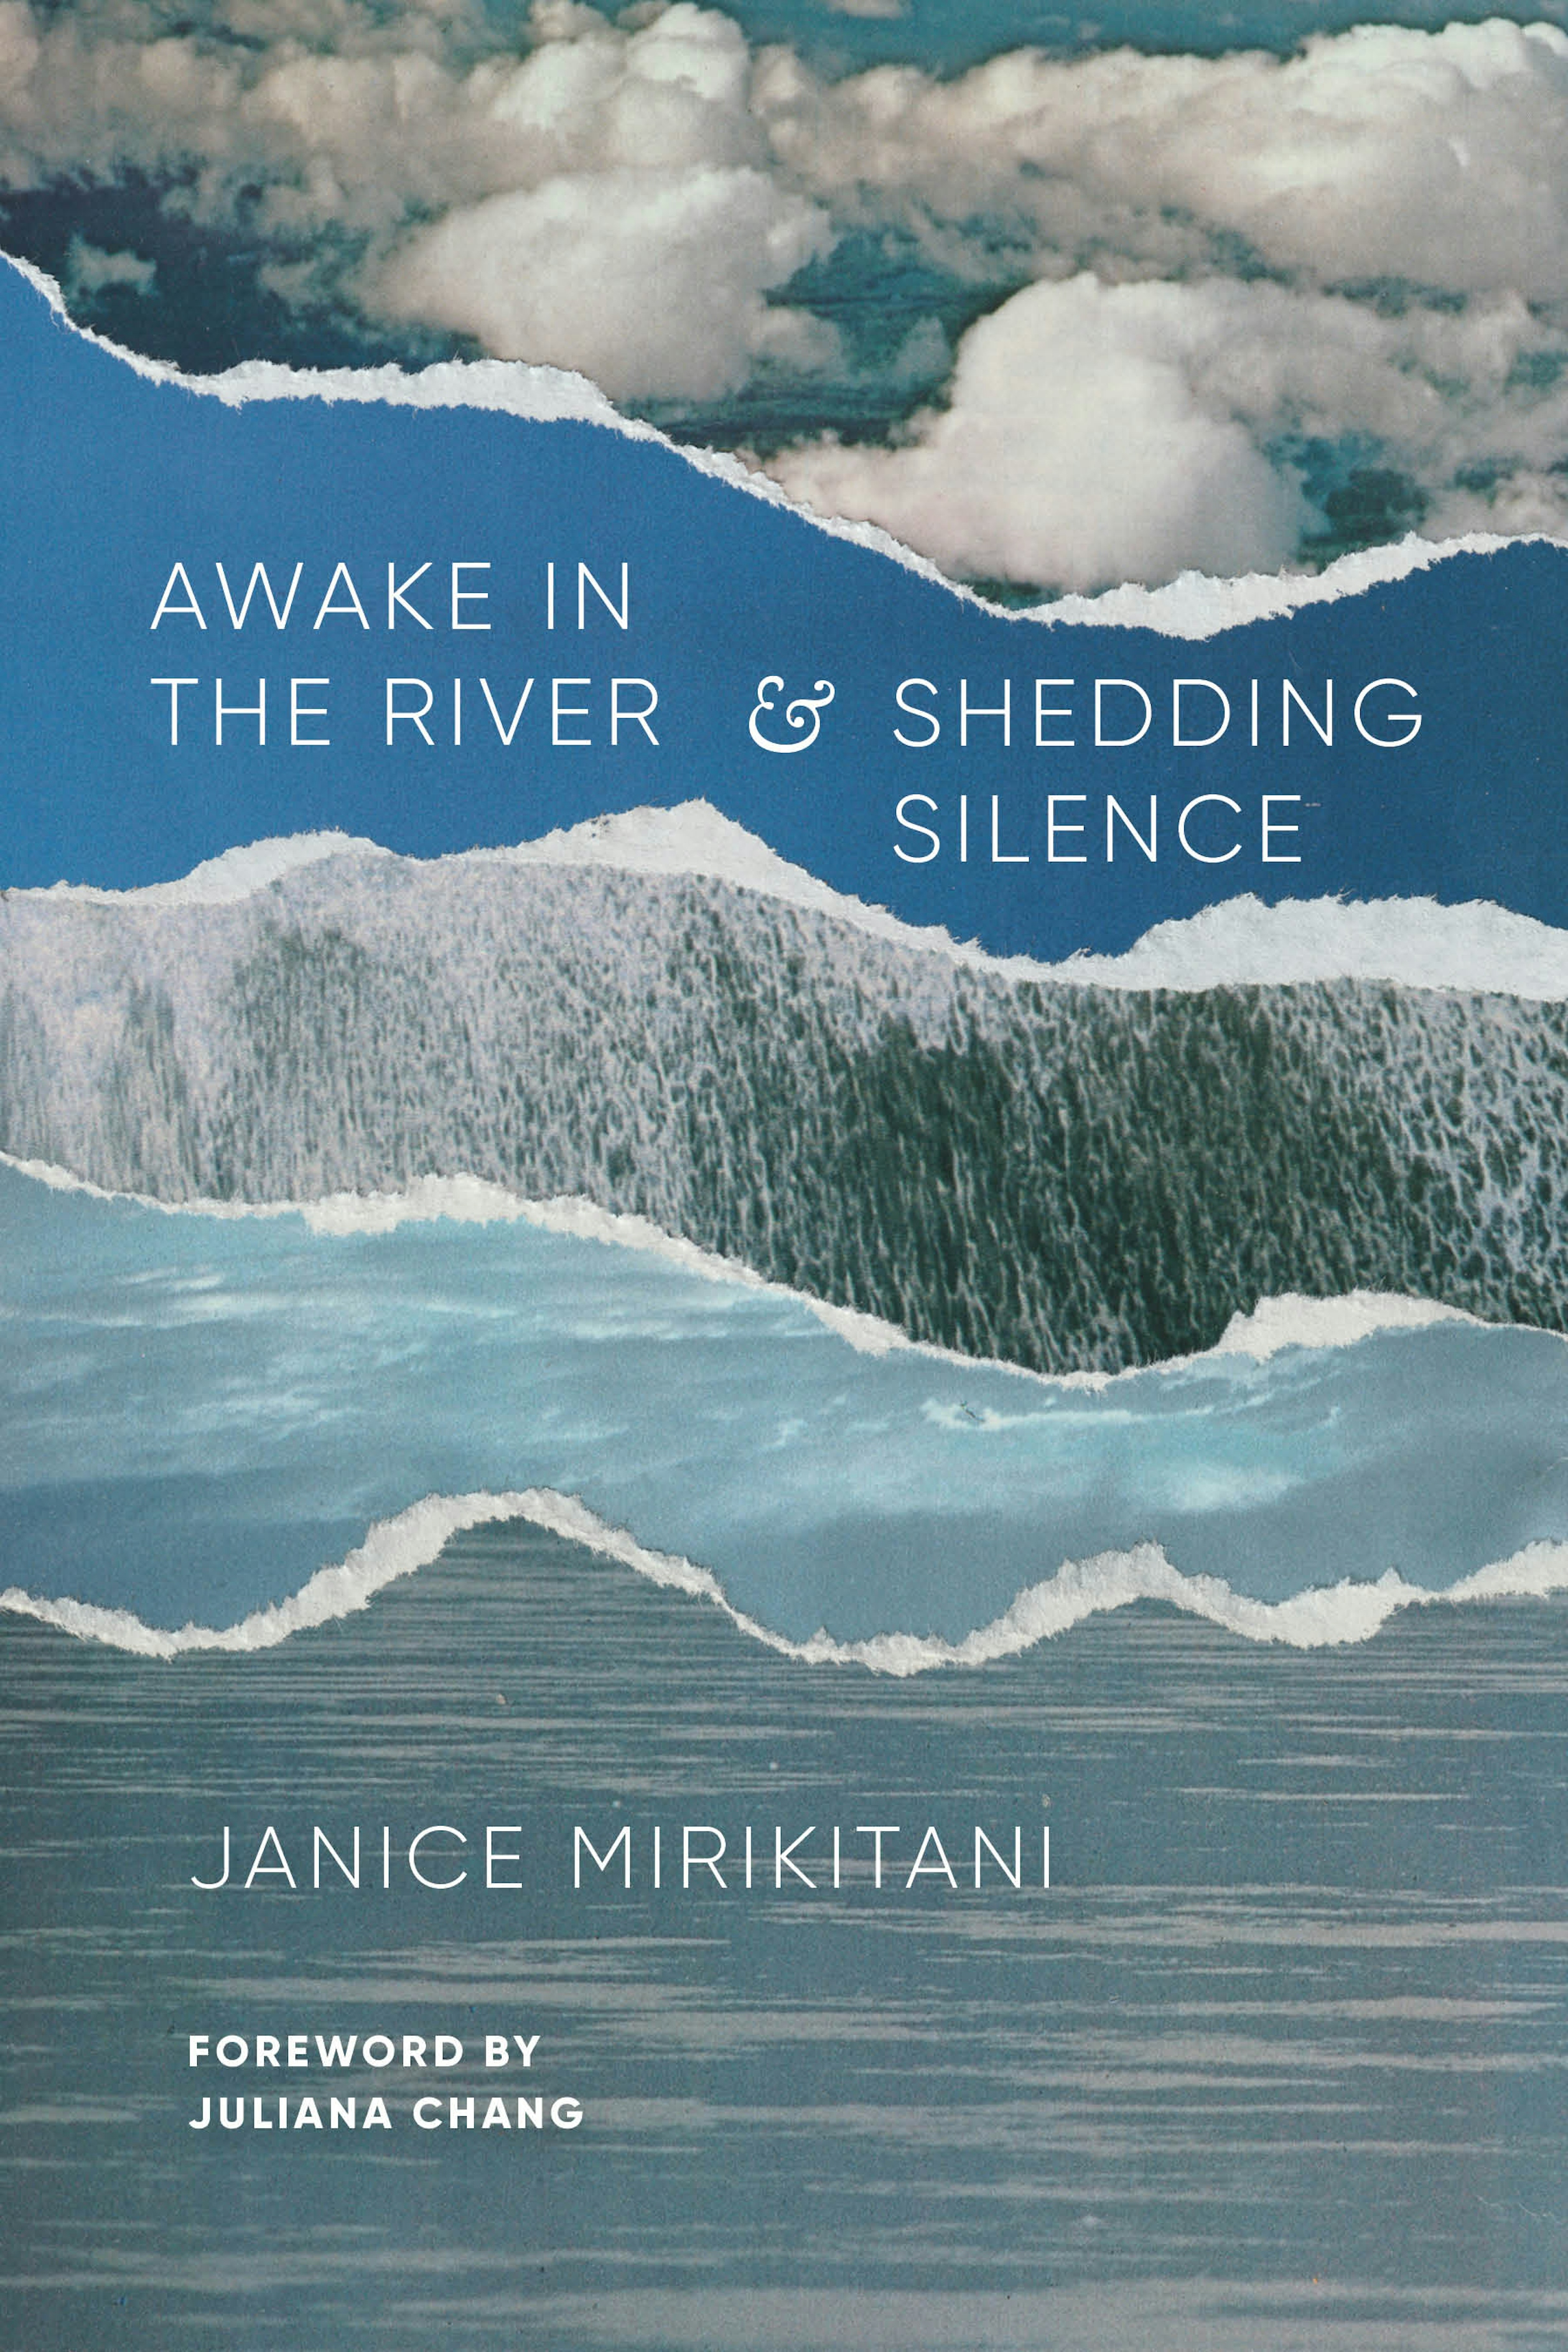 Awake in the River and Shedding Silence